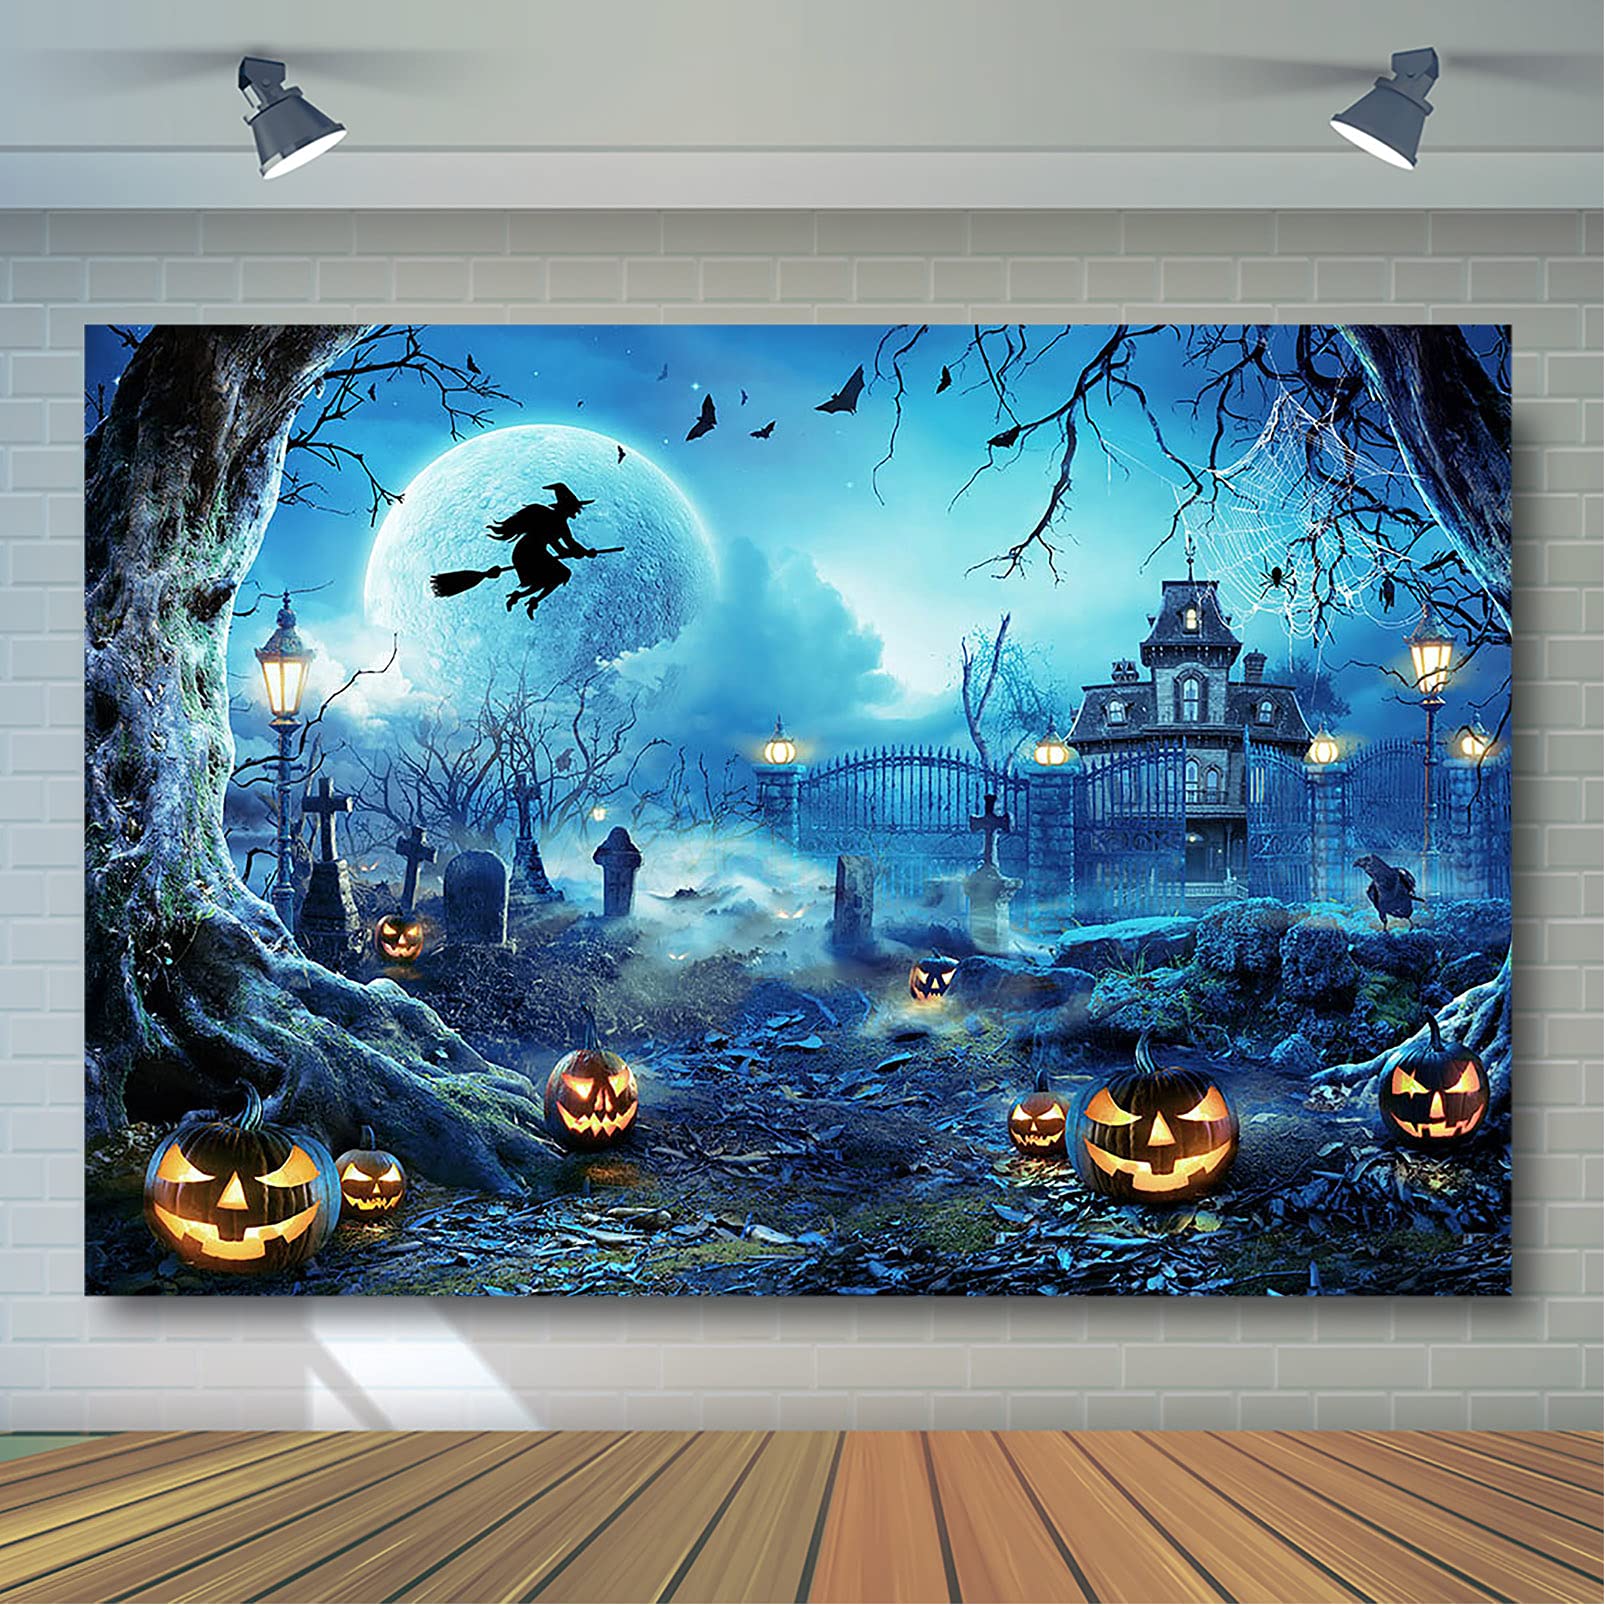 Avezano Halloween Photography Backdrop Full Moon Scary Night Castle Pumpkins Party Background Spooky Witch Bats Cemetery Child Kids Halloween Party Decorations Photoshoot Backdrops (7x5ft, Blue)